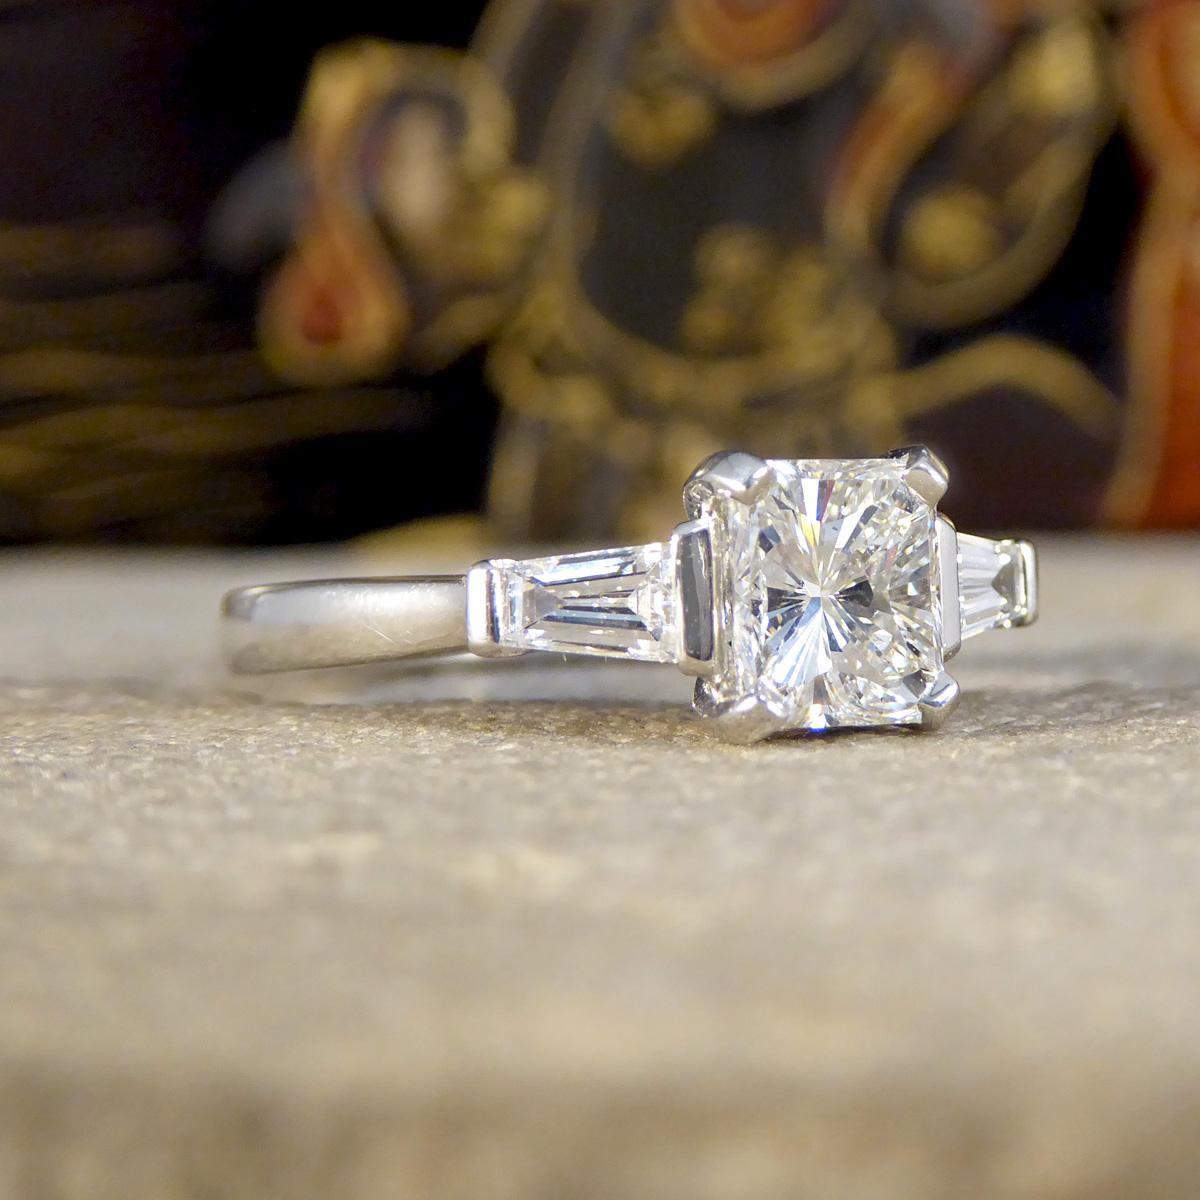 This gorgeous Radiant Cut Diamond ring, set in the finest platinum, is the epitome of elegance and sophistication. At its core sits a breathtaking 1.02ct radiant cut diamond, known for its ability to capture and reflect light, creating a dazzling